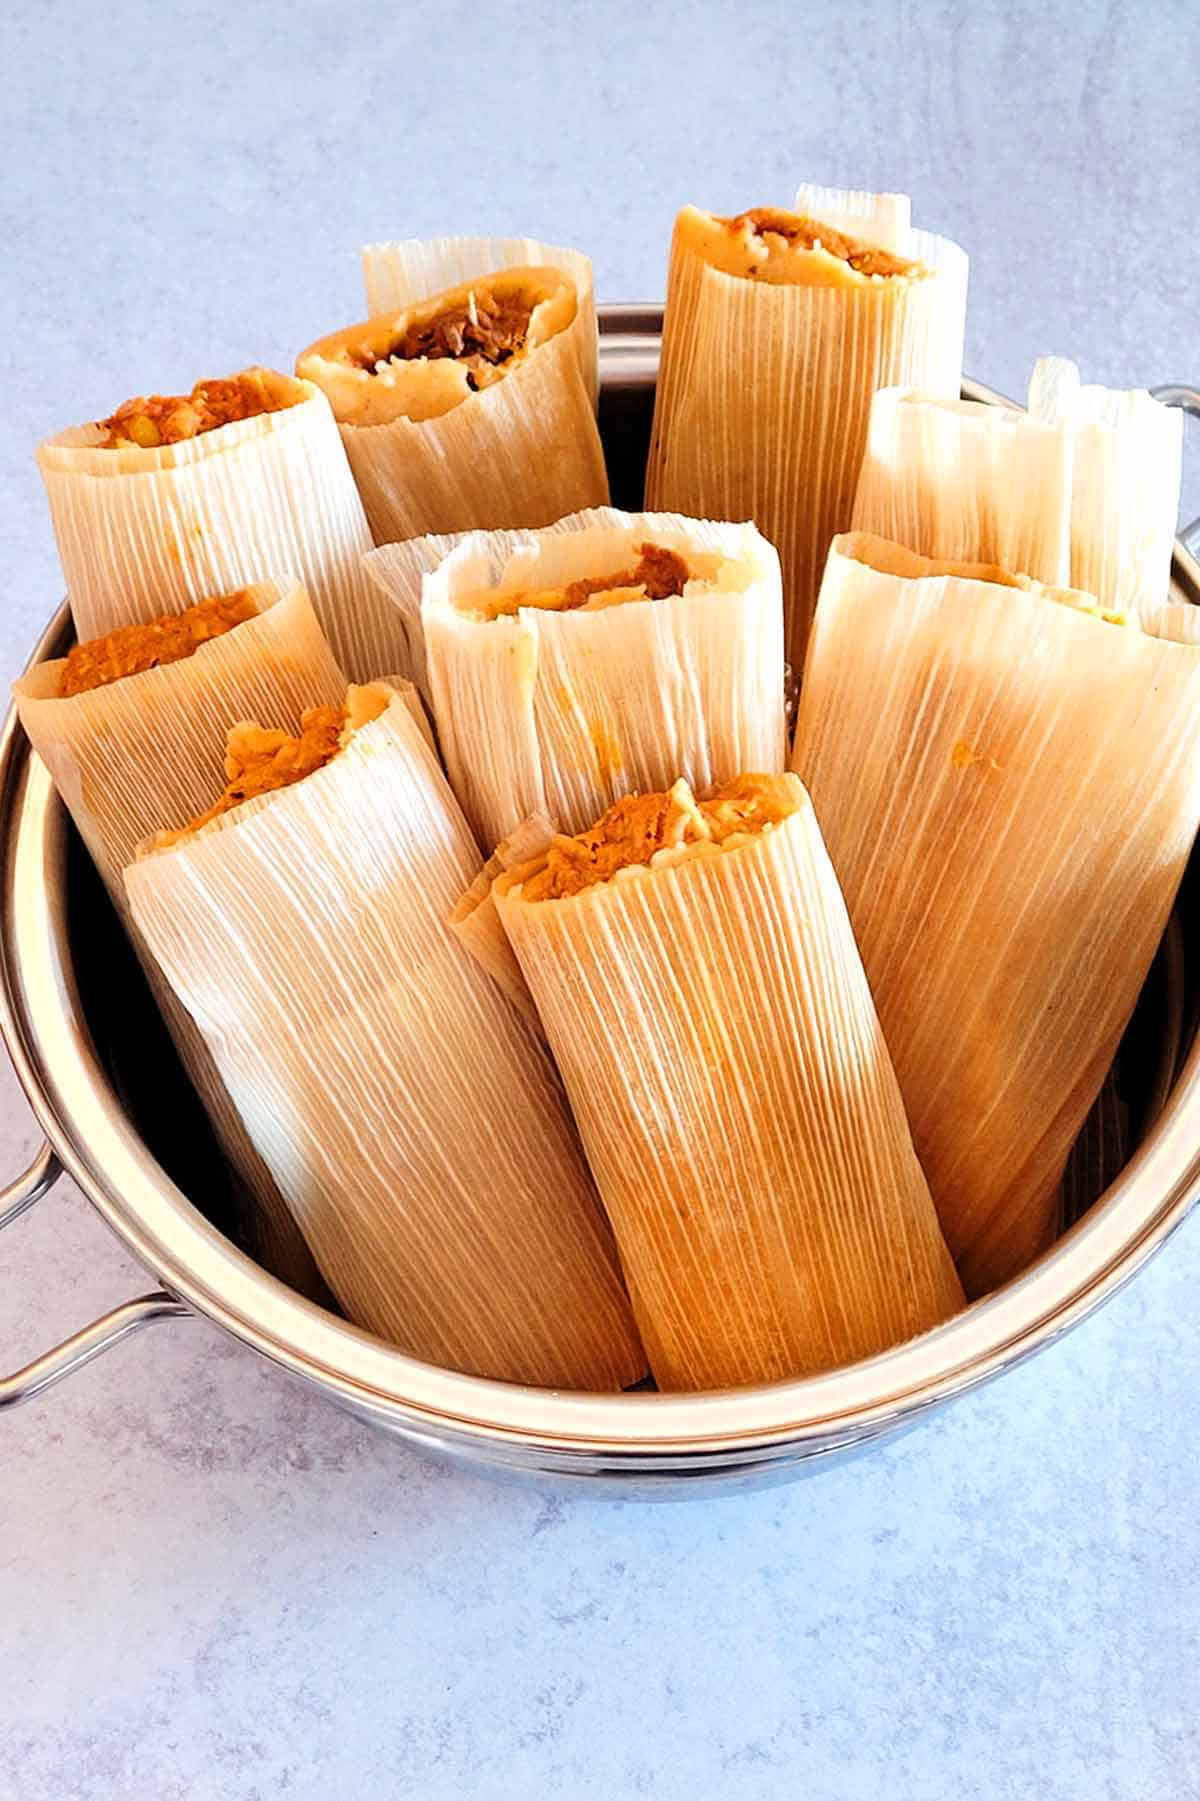 Cooking frozen tamales in a steamer.